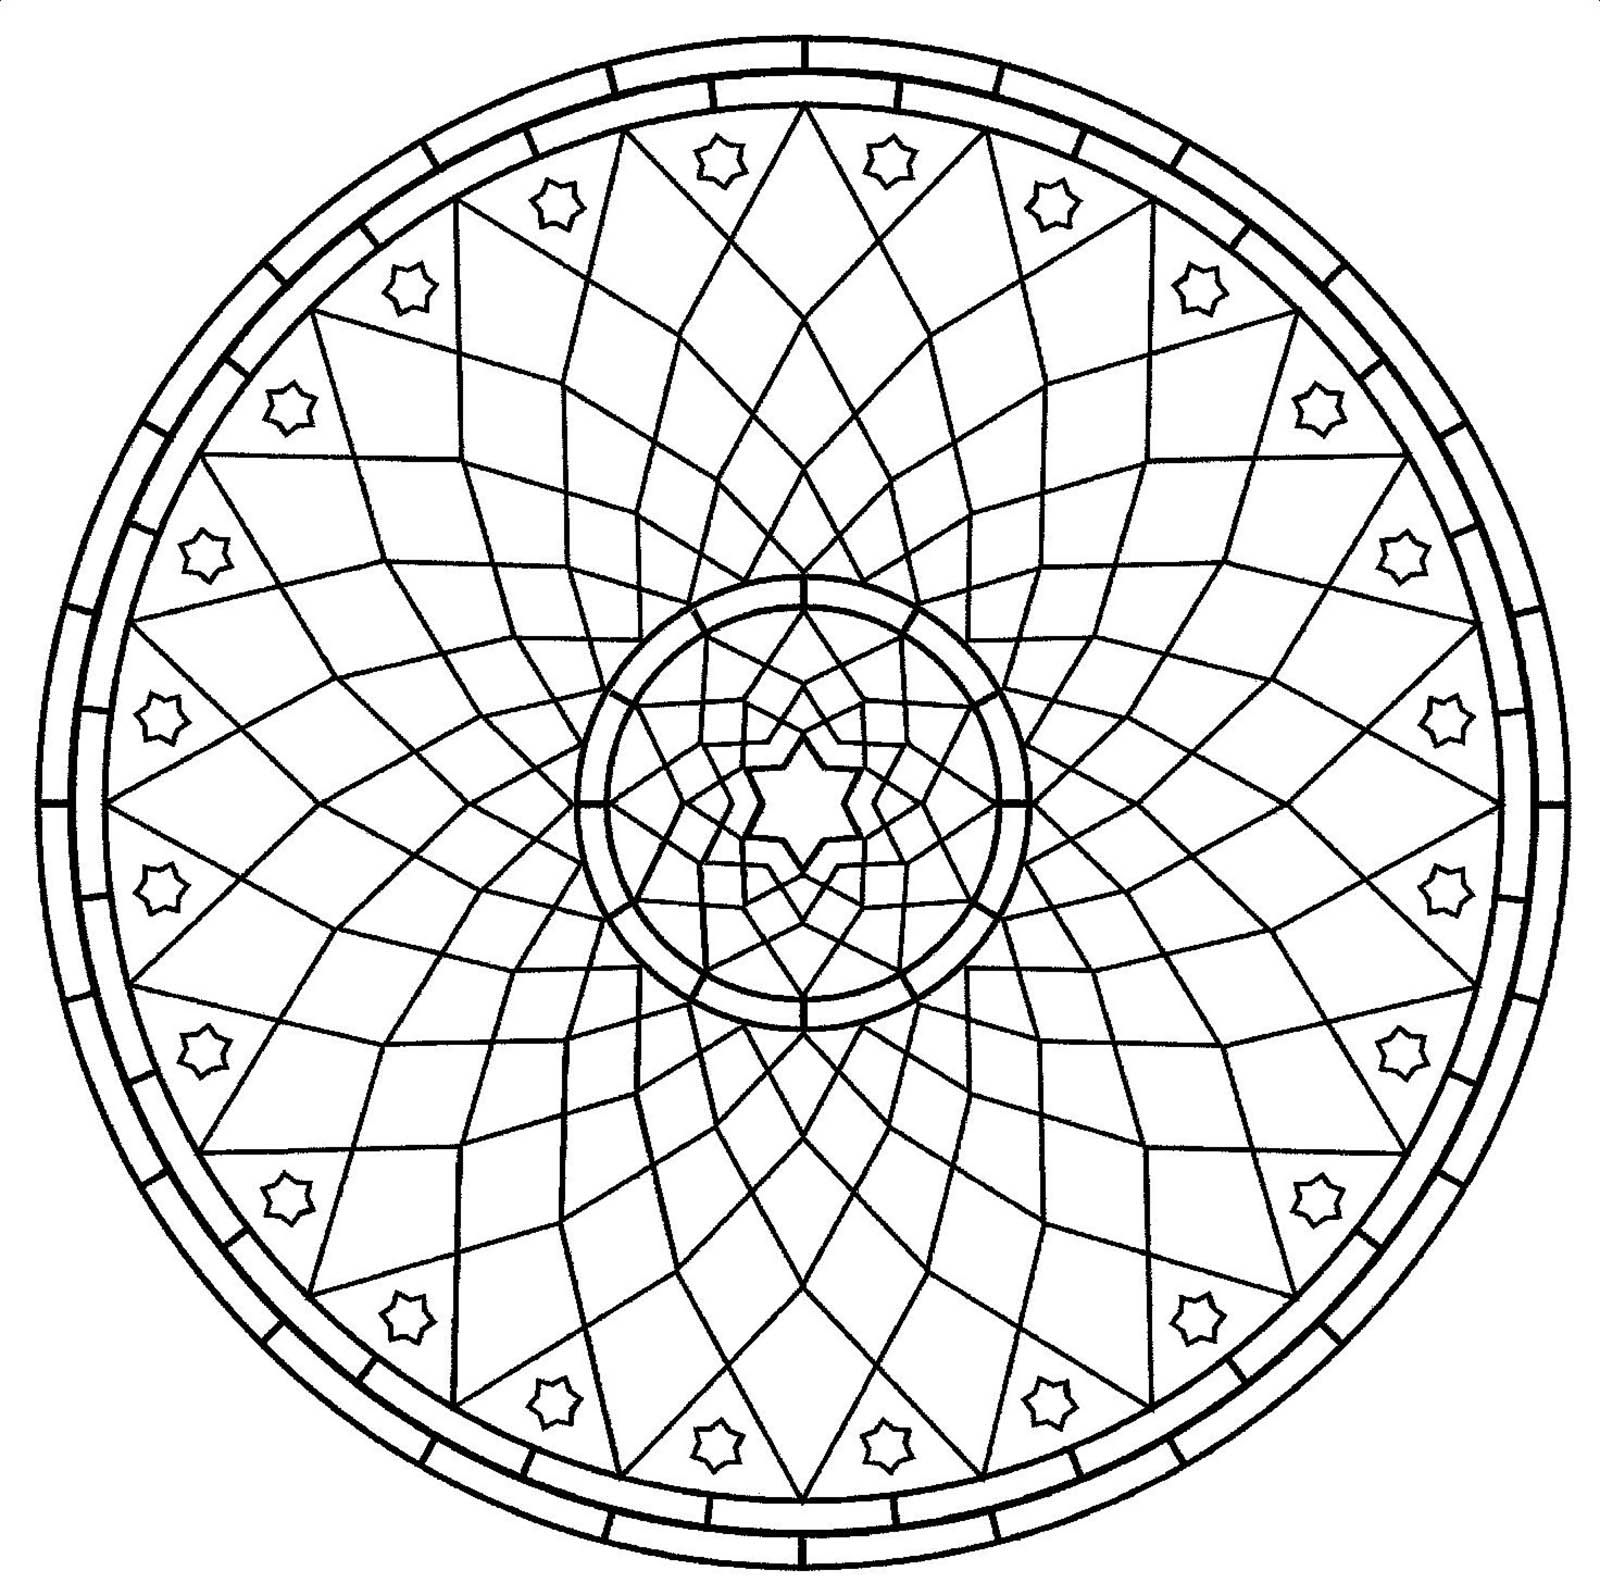 Mandalas coloring page to print and color for free